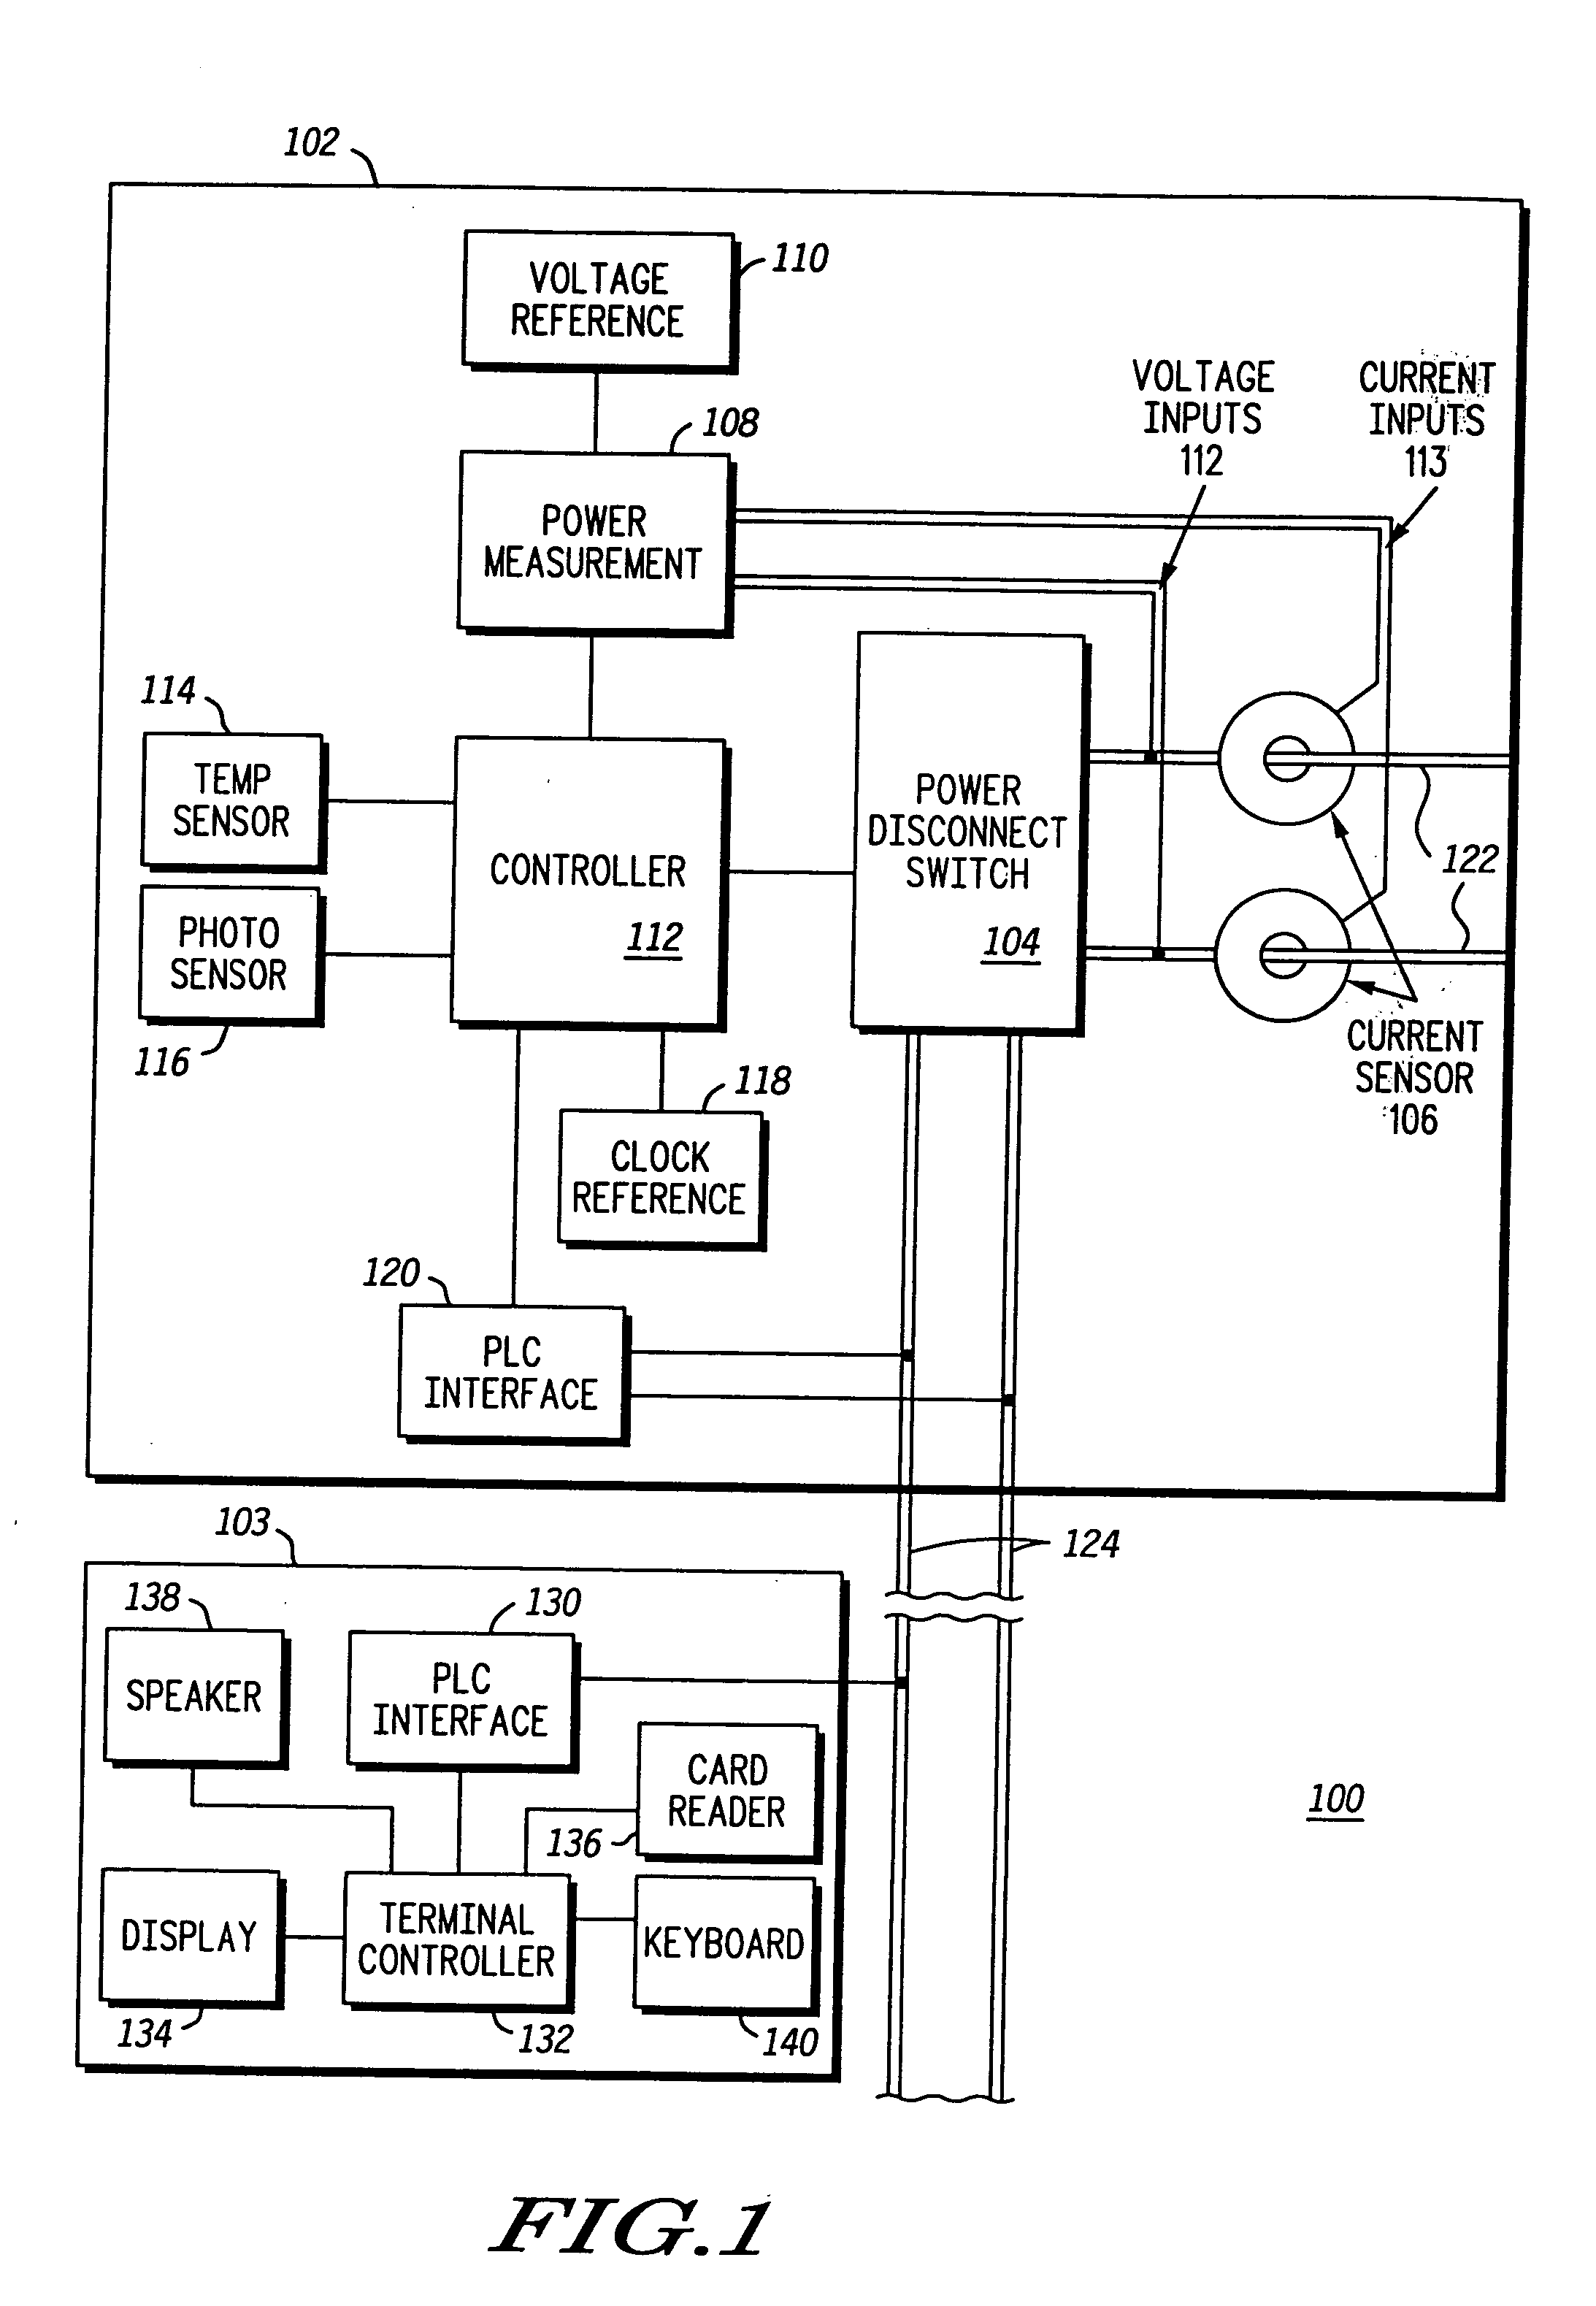 Electric power meter including a temperature sensor and controller